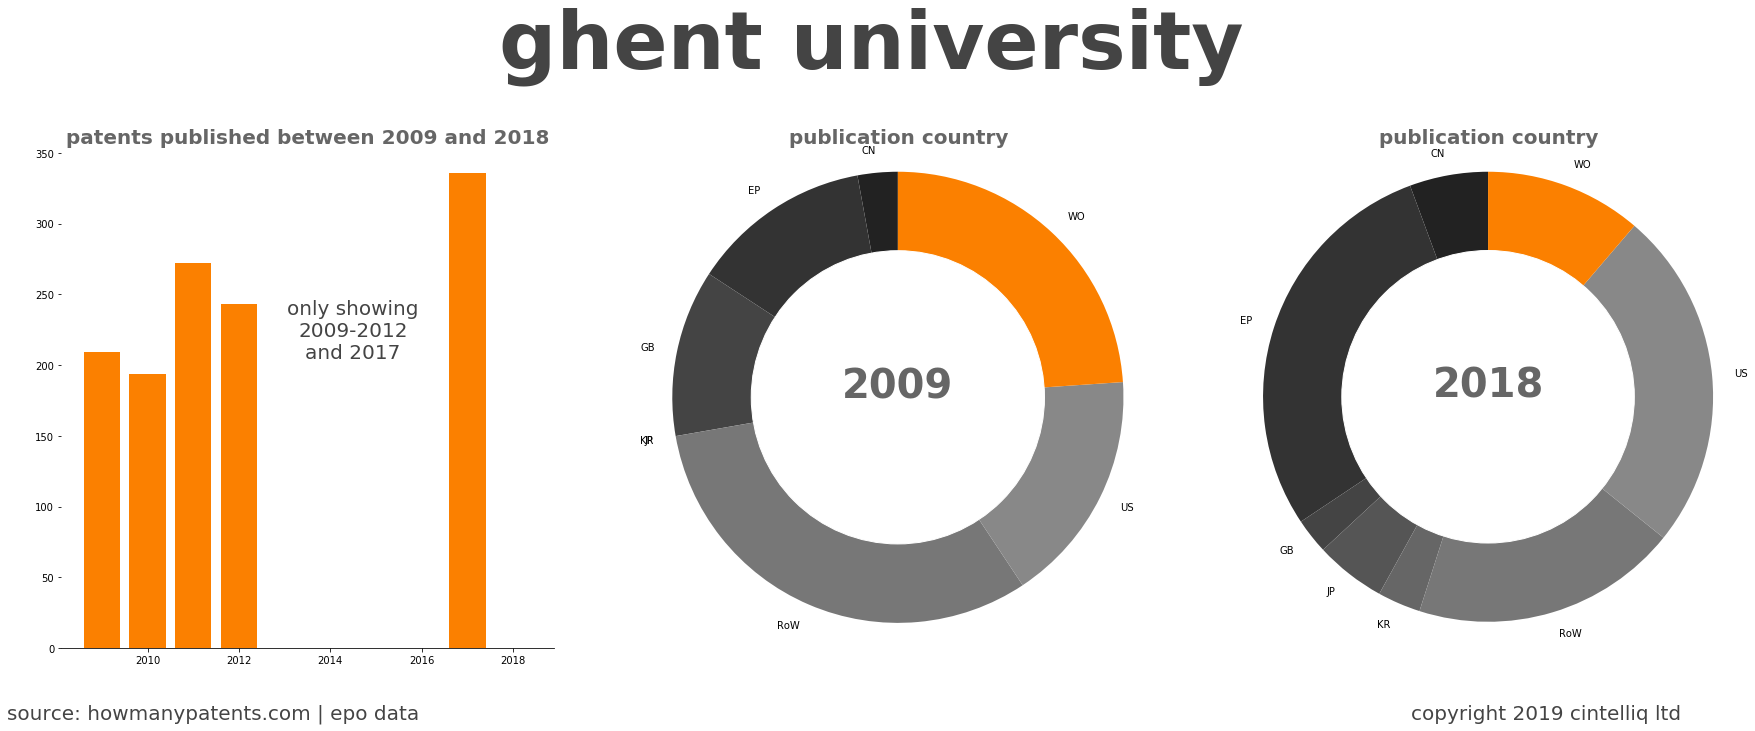 summary of patents for Ghent University